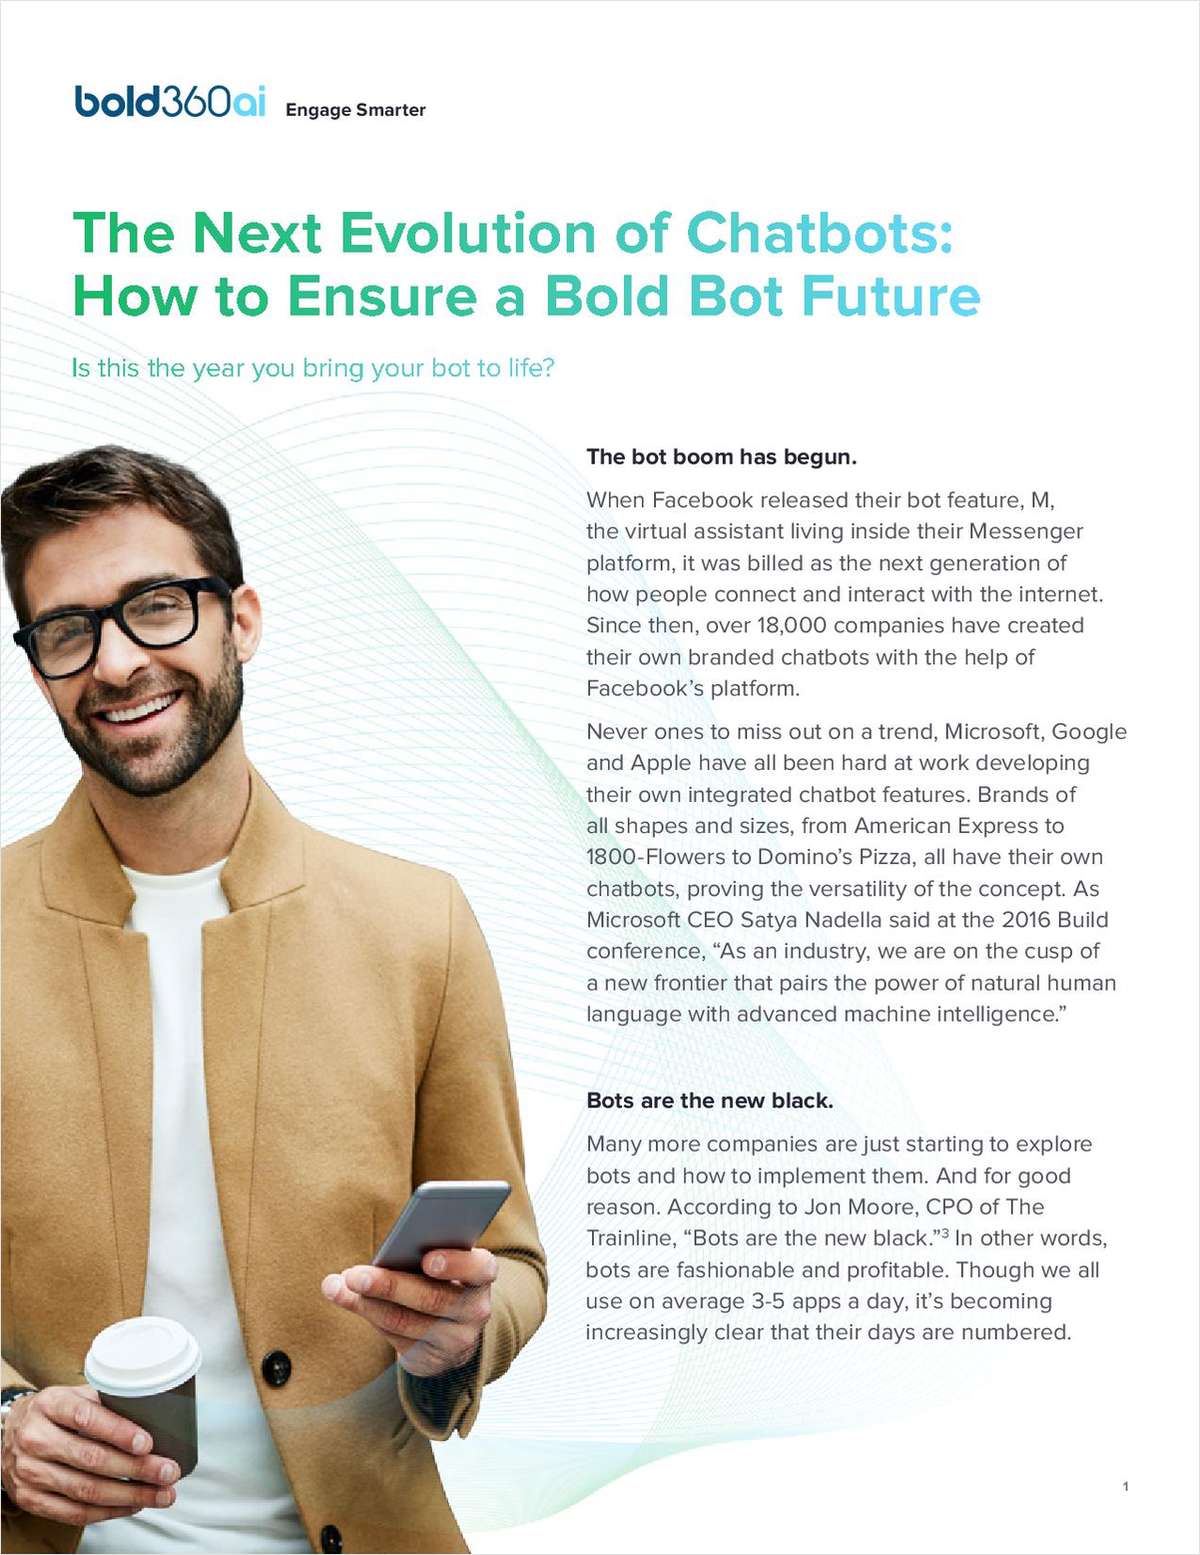 The Next Evolution of Chatbots: How to Ensure a Bold Bot Future